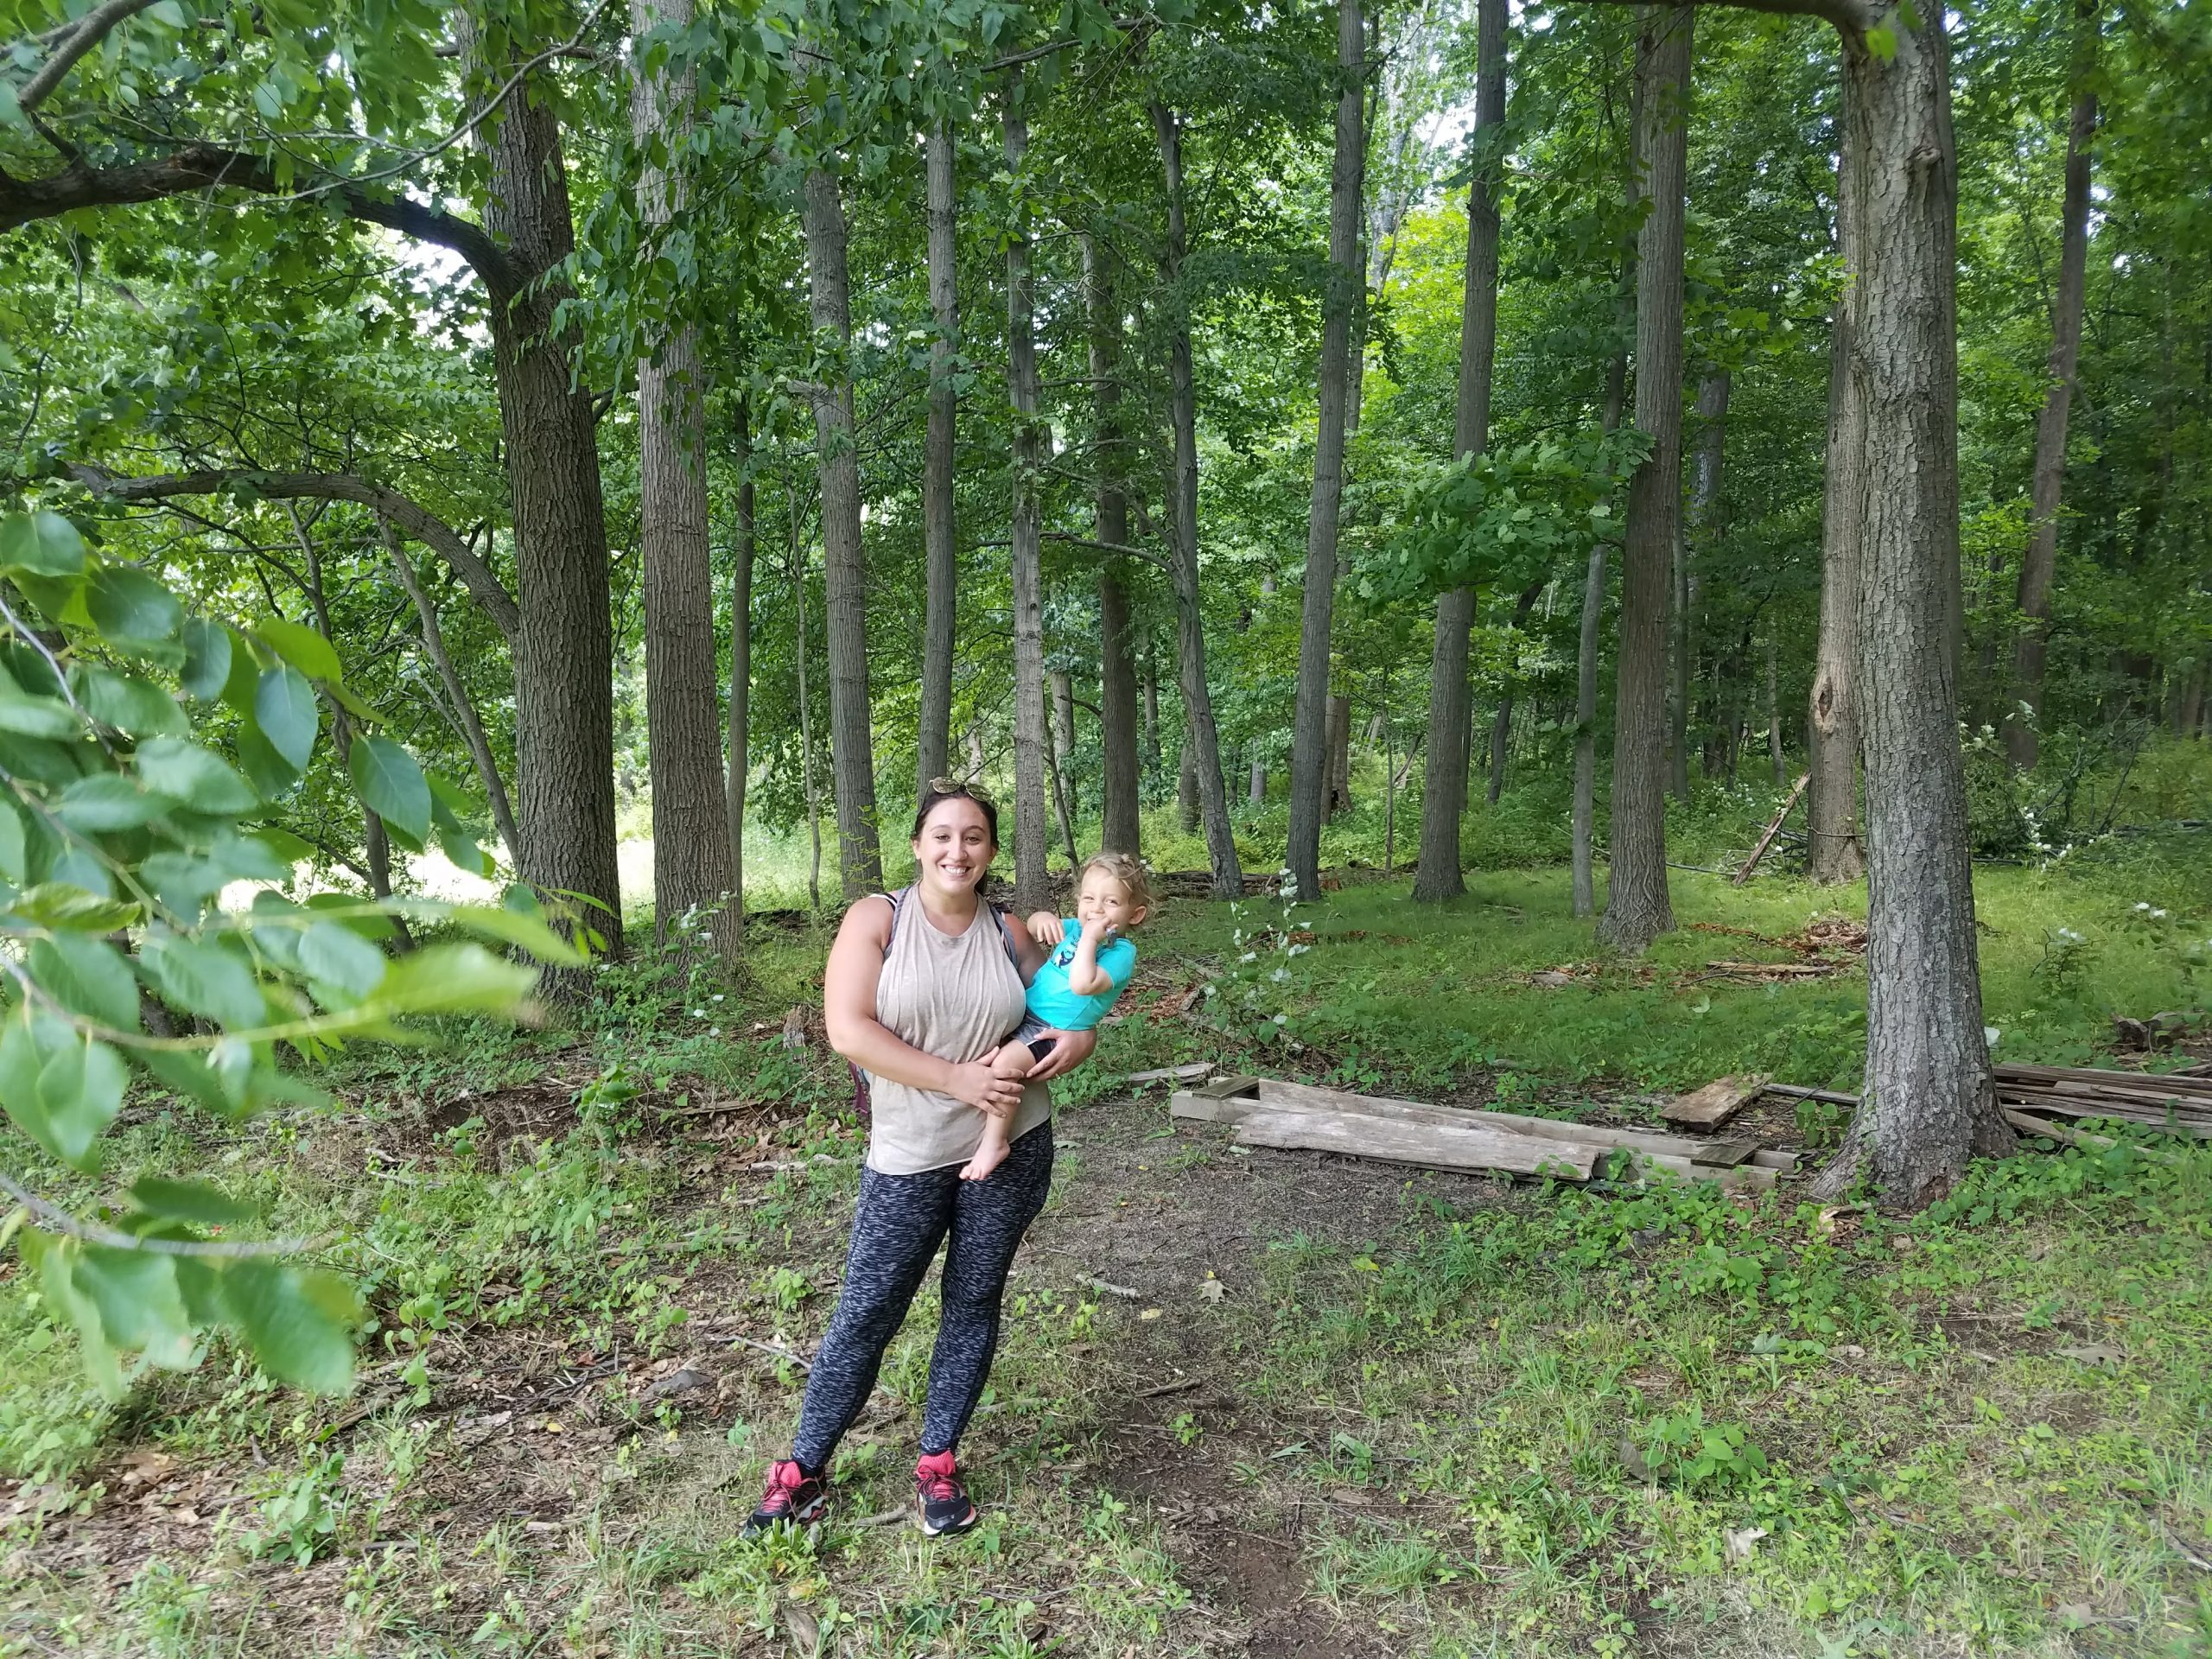 A woman and child stand in the middle of the forest in Jockey Hollow Park